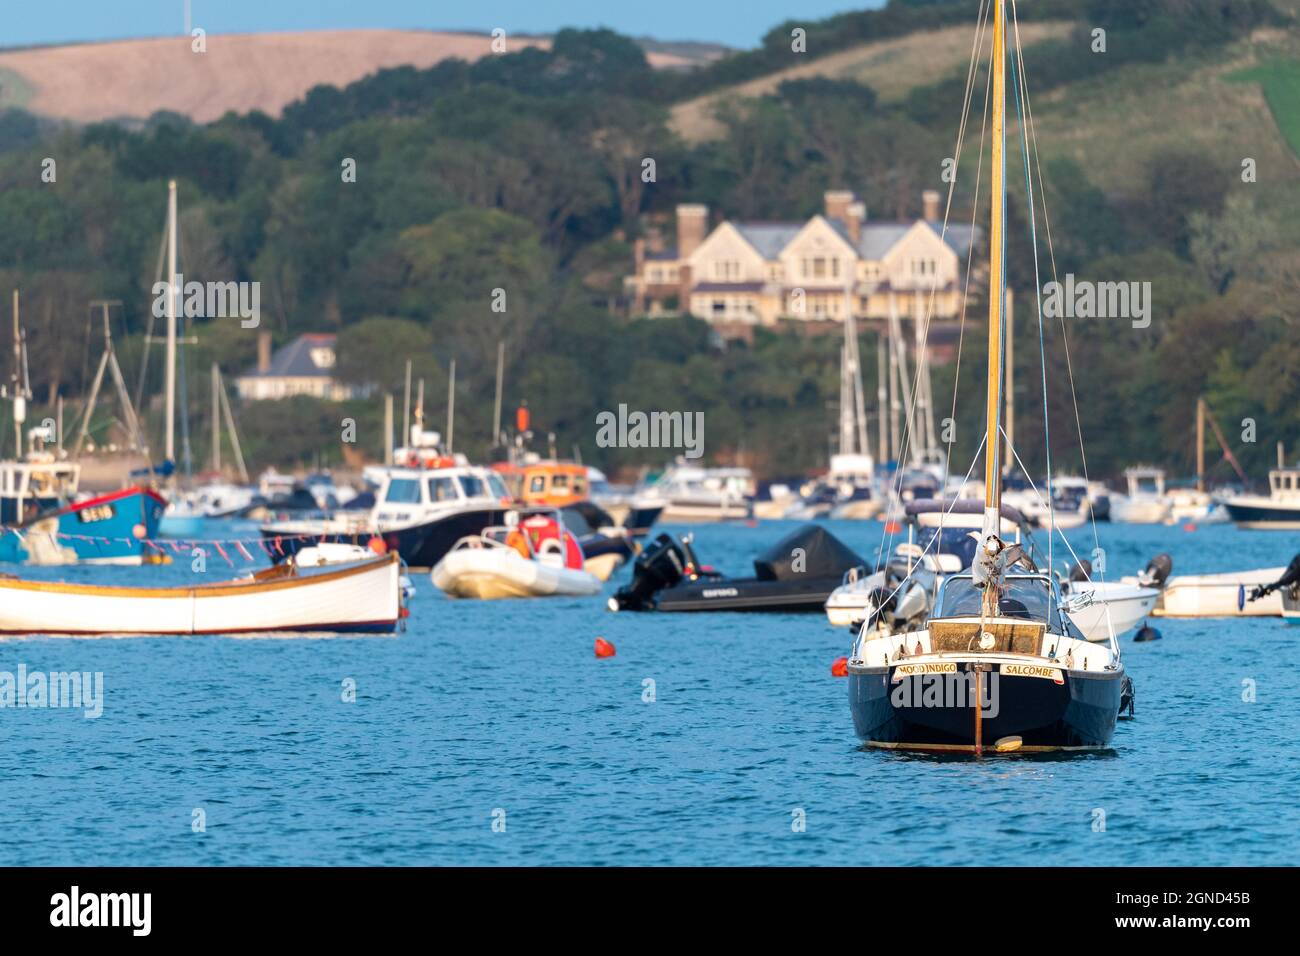 Low view across Salcombe Harbour toward East Portlemouth and large mansion overlooking the harbour, taken at sunset in the golden hour, yachts in view Stock Photo